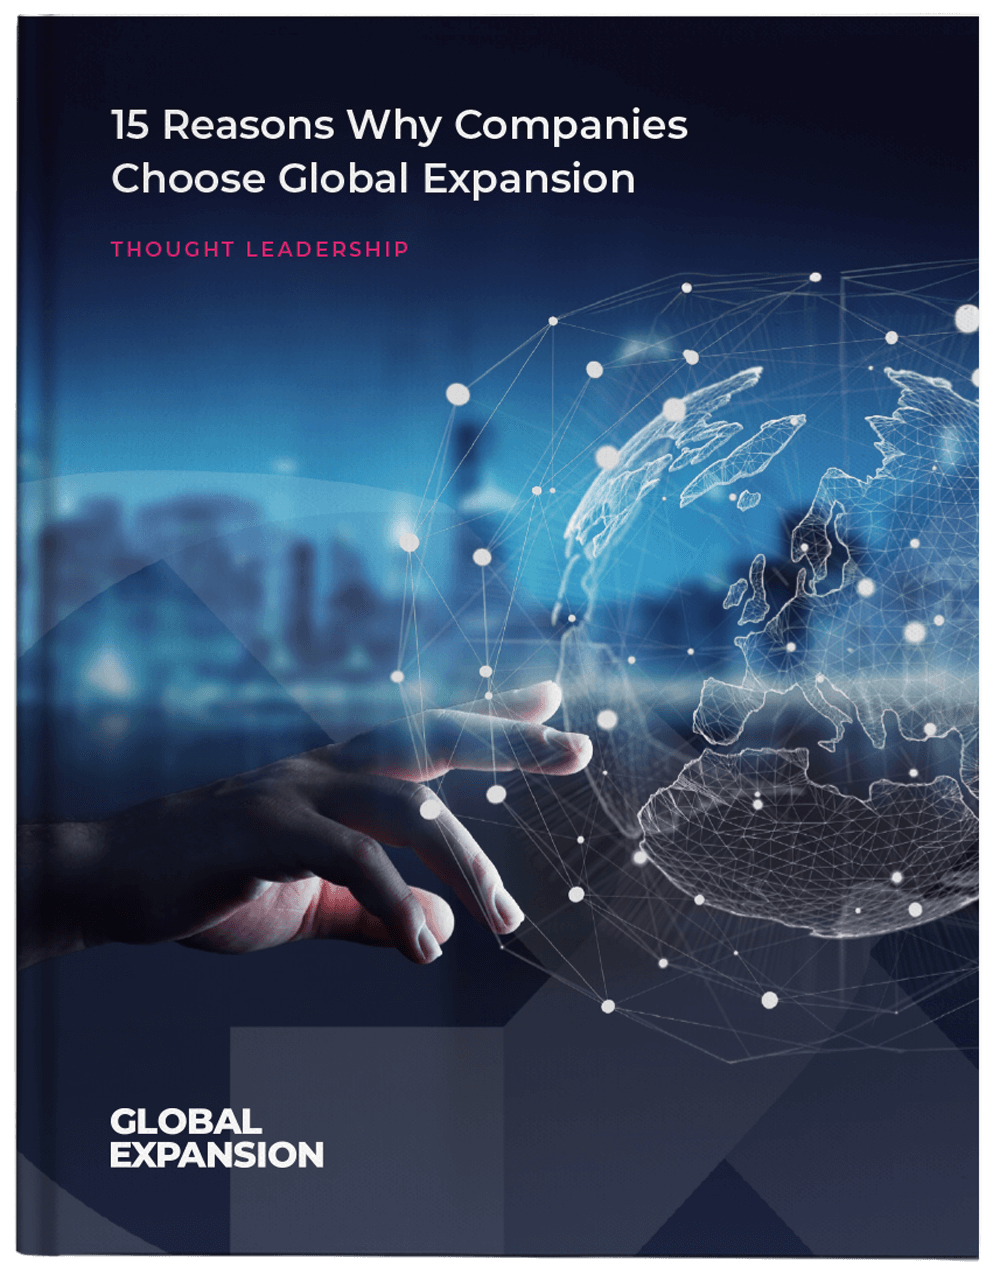 15-Reasons-Why-Companies-Choose-Global-Expansion-Cover